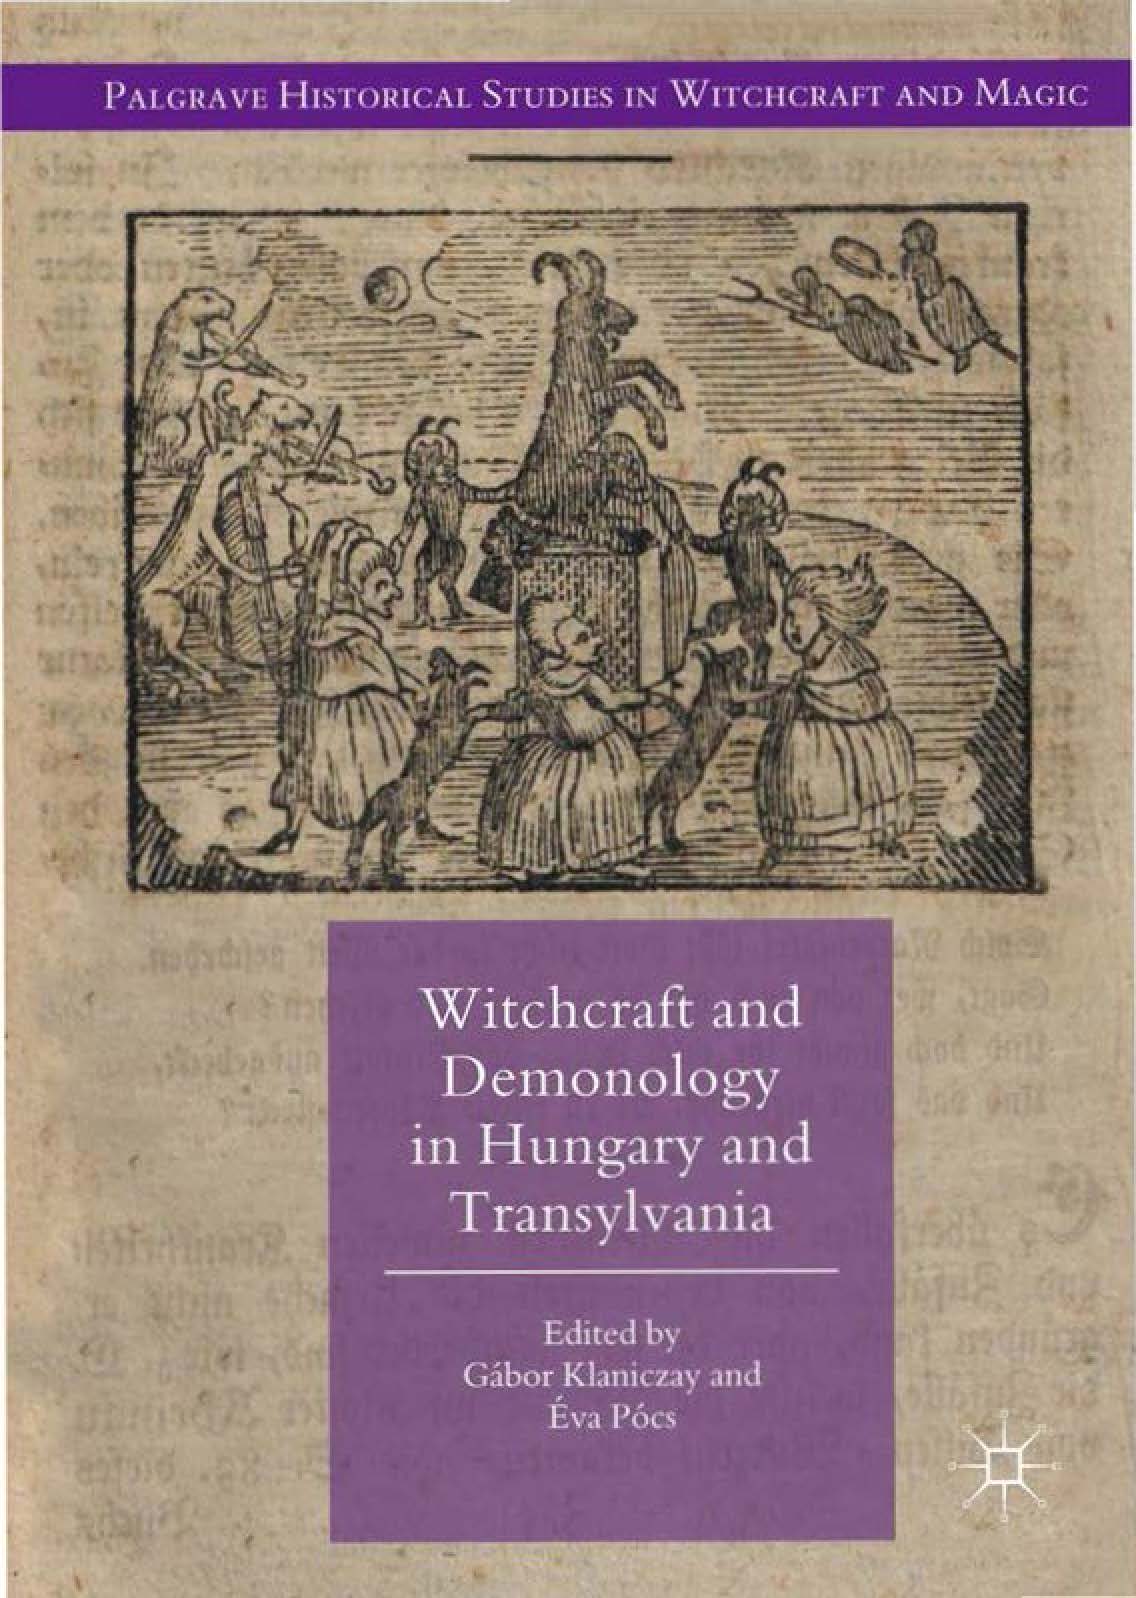 KLANICZAY G. PCS . ed. Witchcraft and Demonology in Hungary PALGRAVE cover